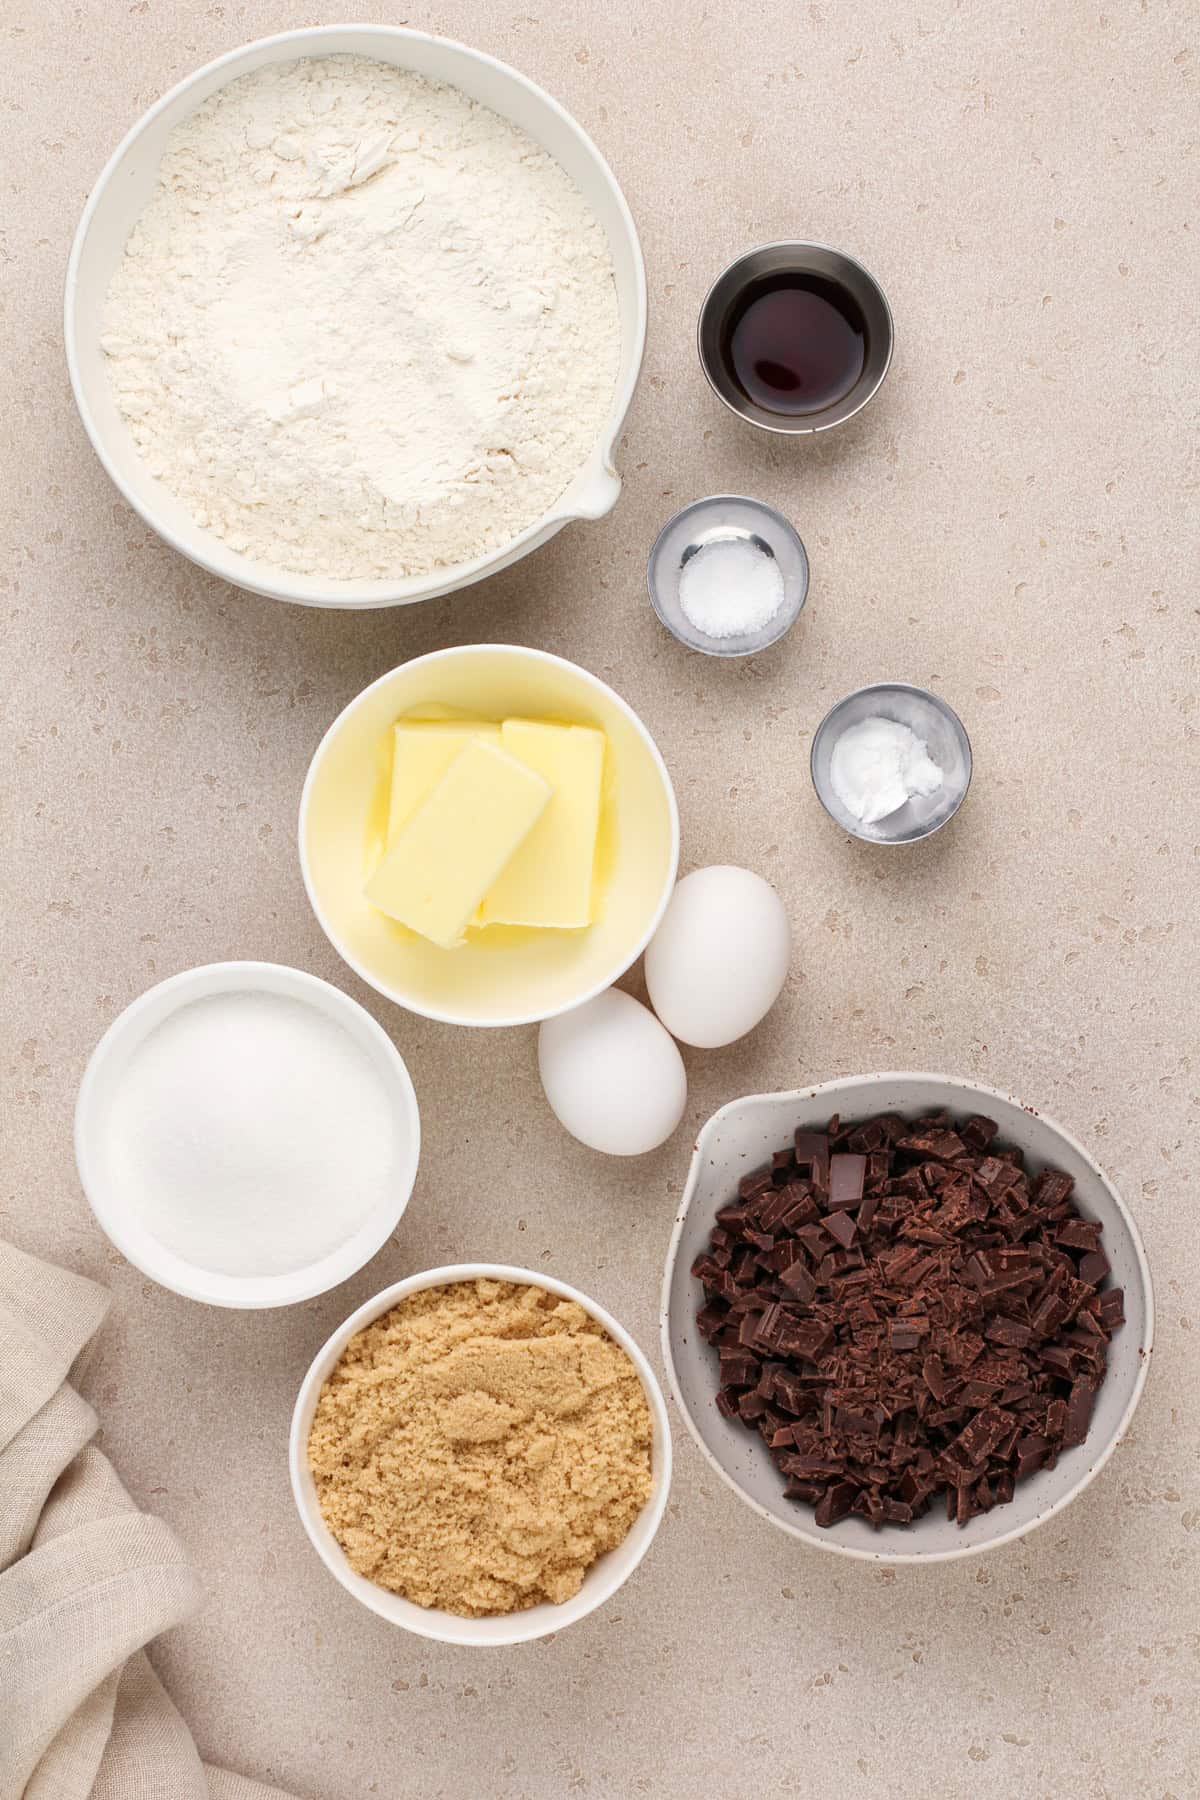 Ingredients for easy chocolate chip cookies arranged on a beige countertop.